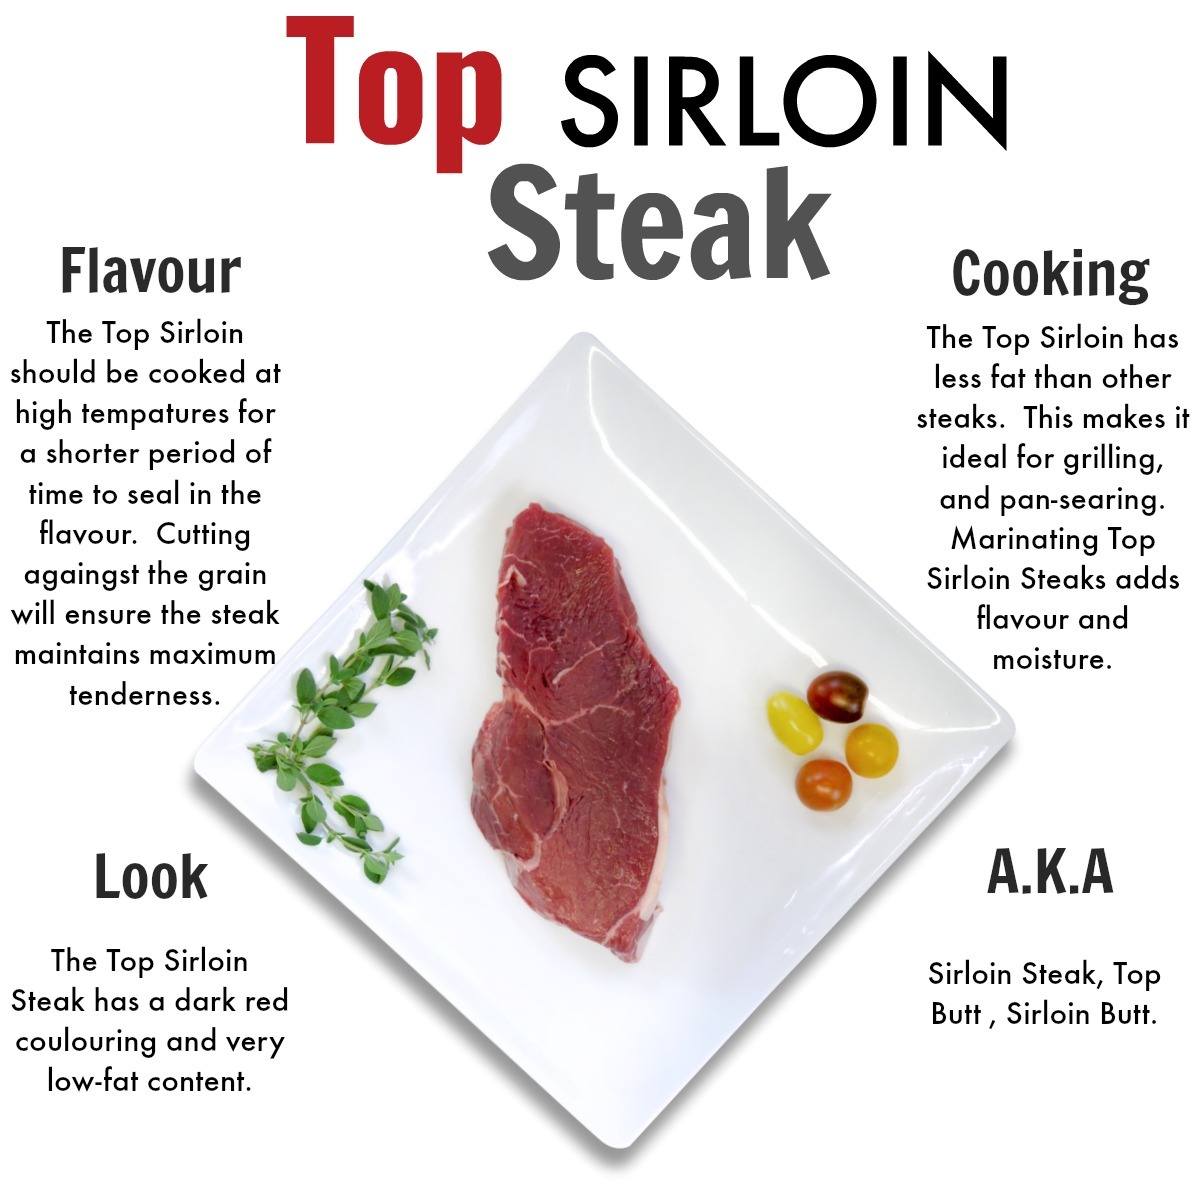 Affordable grass-fed beef delivery near me, steaks, ground beef and more - Top Sirloin Steak 2